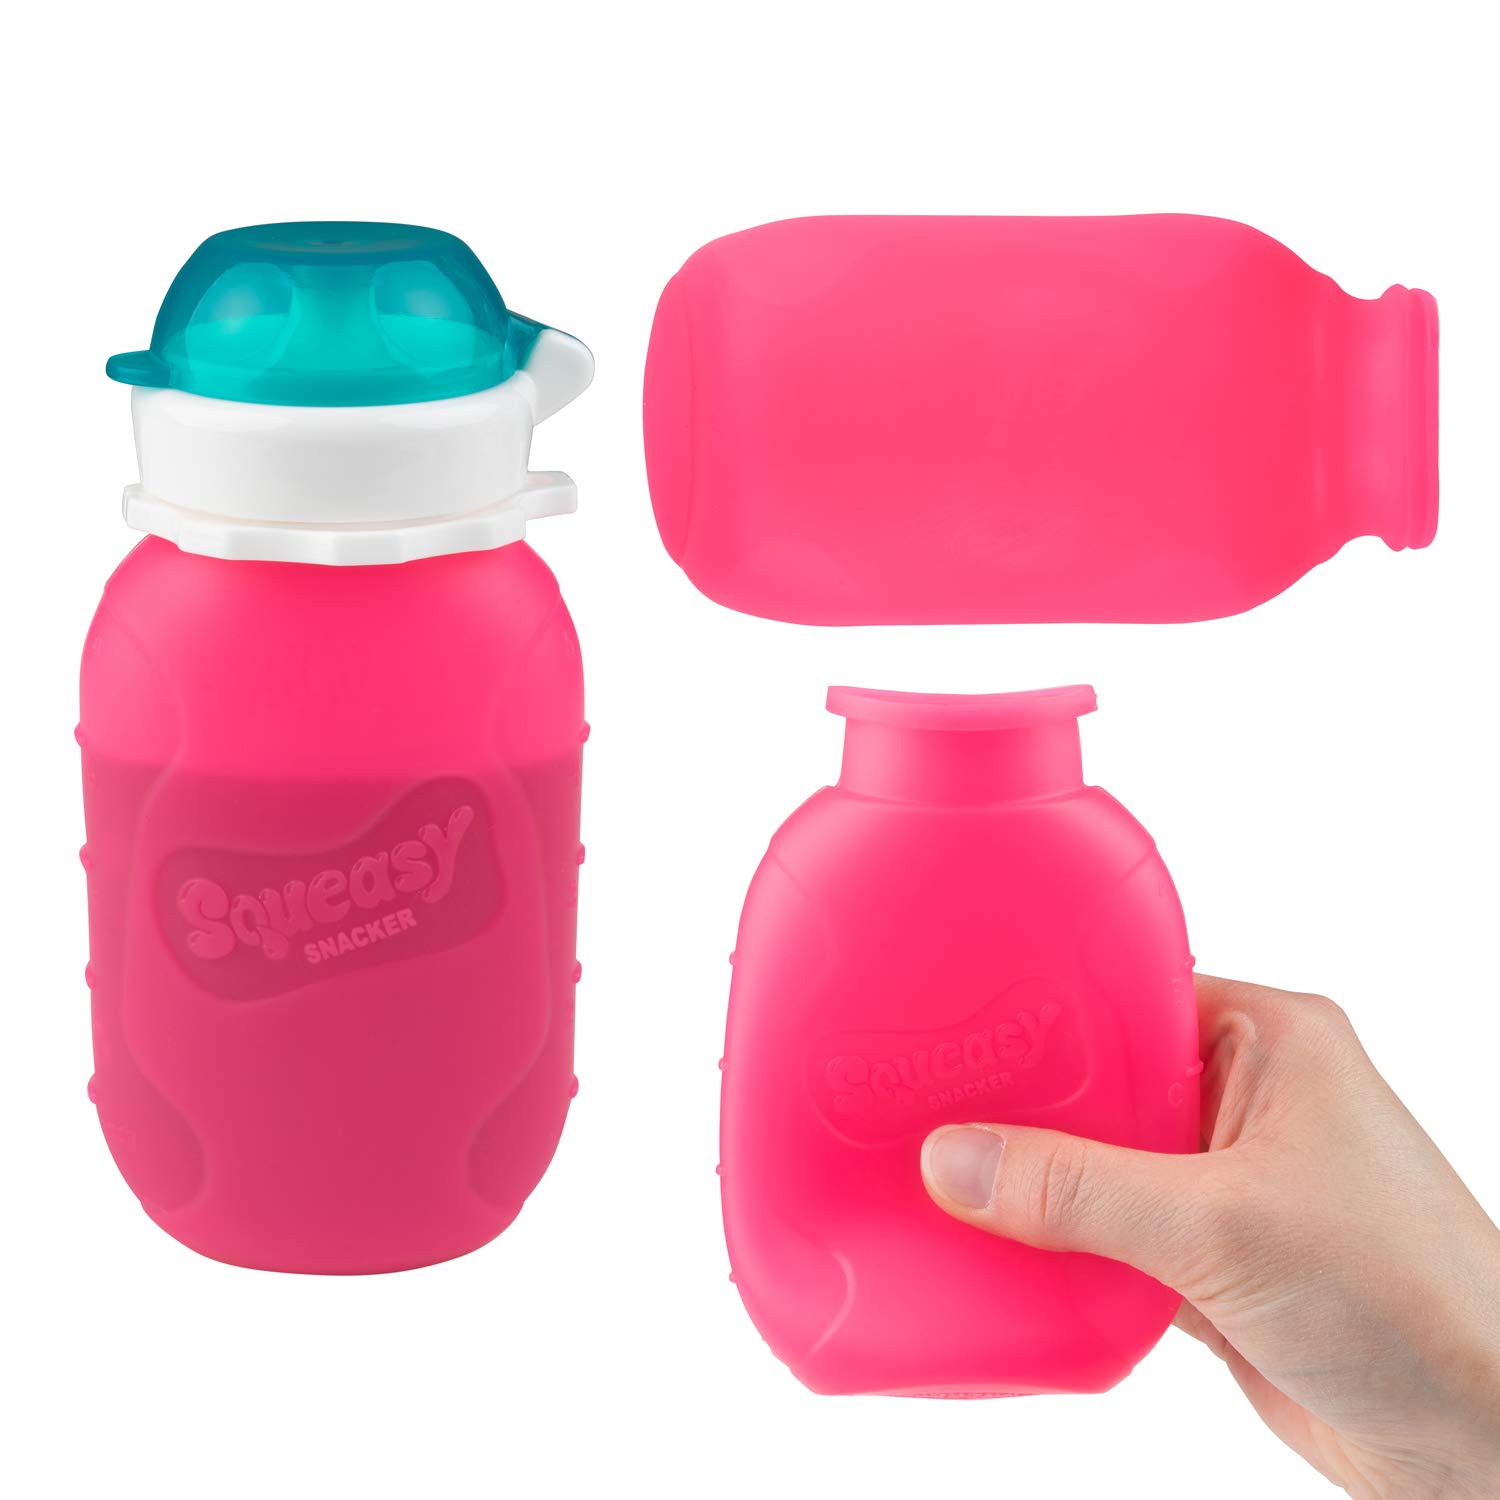 Pink 6 oz Squeasy Snacker Spill Proof Silicone Reusable Food Pouch - for Both Soft Foods and Liquids - Water, Apple Sauce, Yogurt, Smoothies, Baby Food - Dishwasher Safe